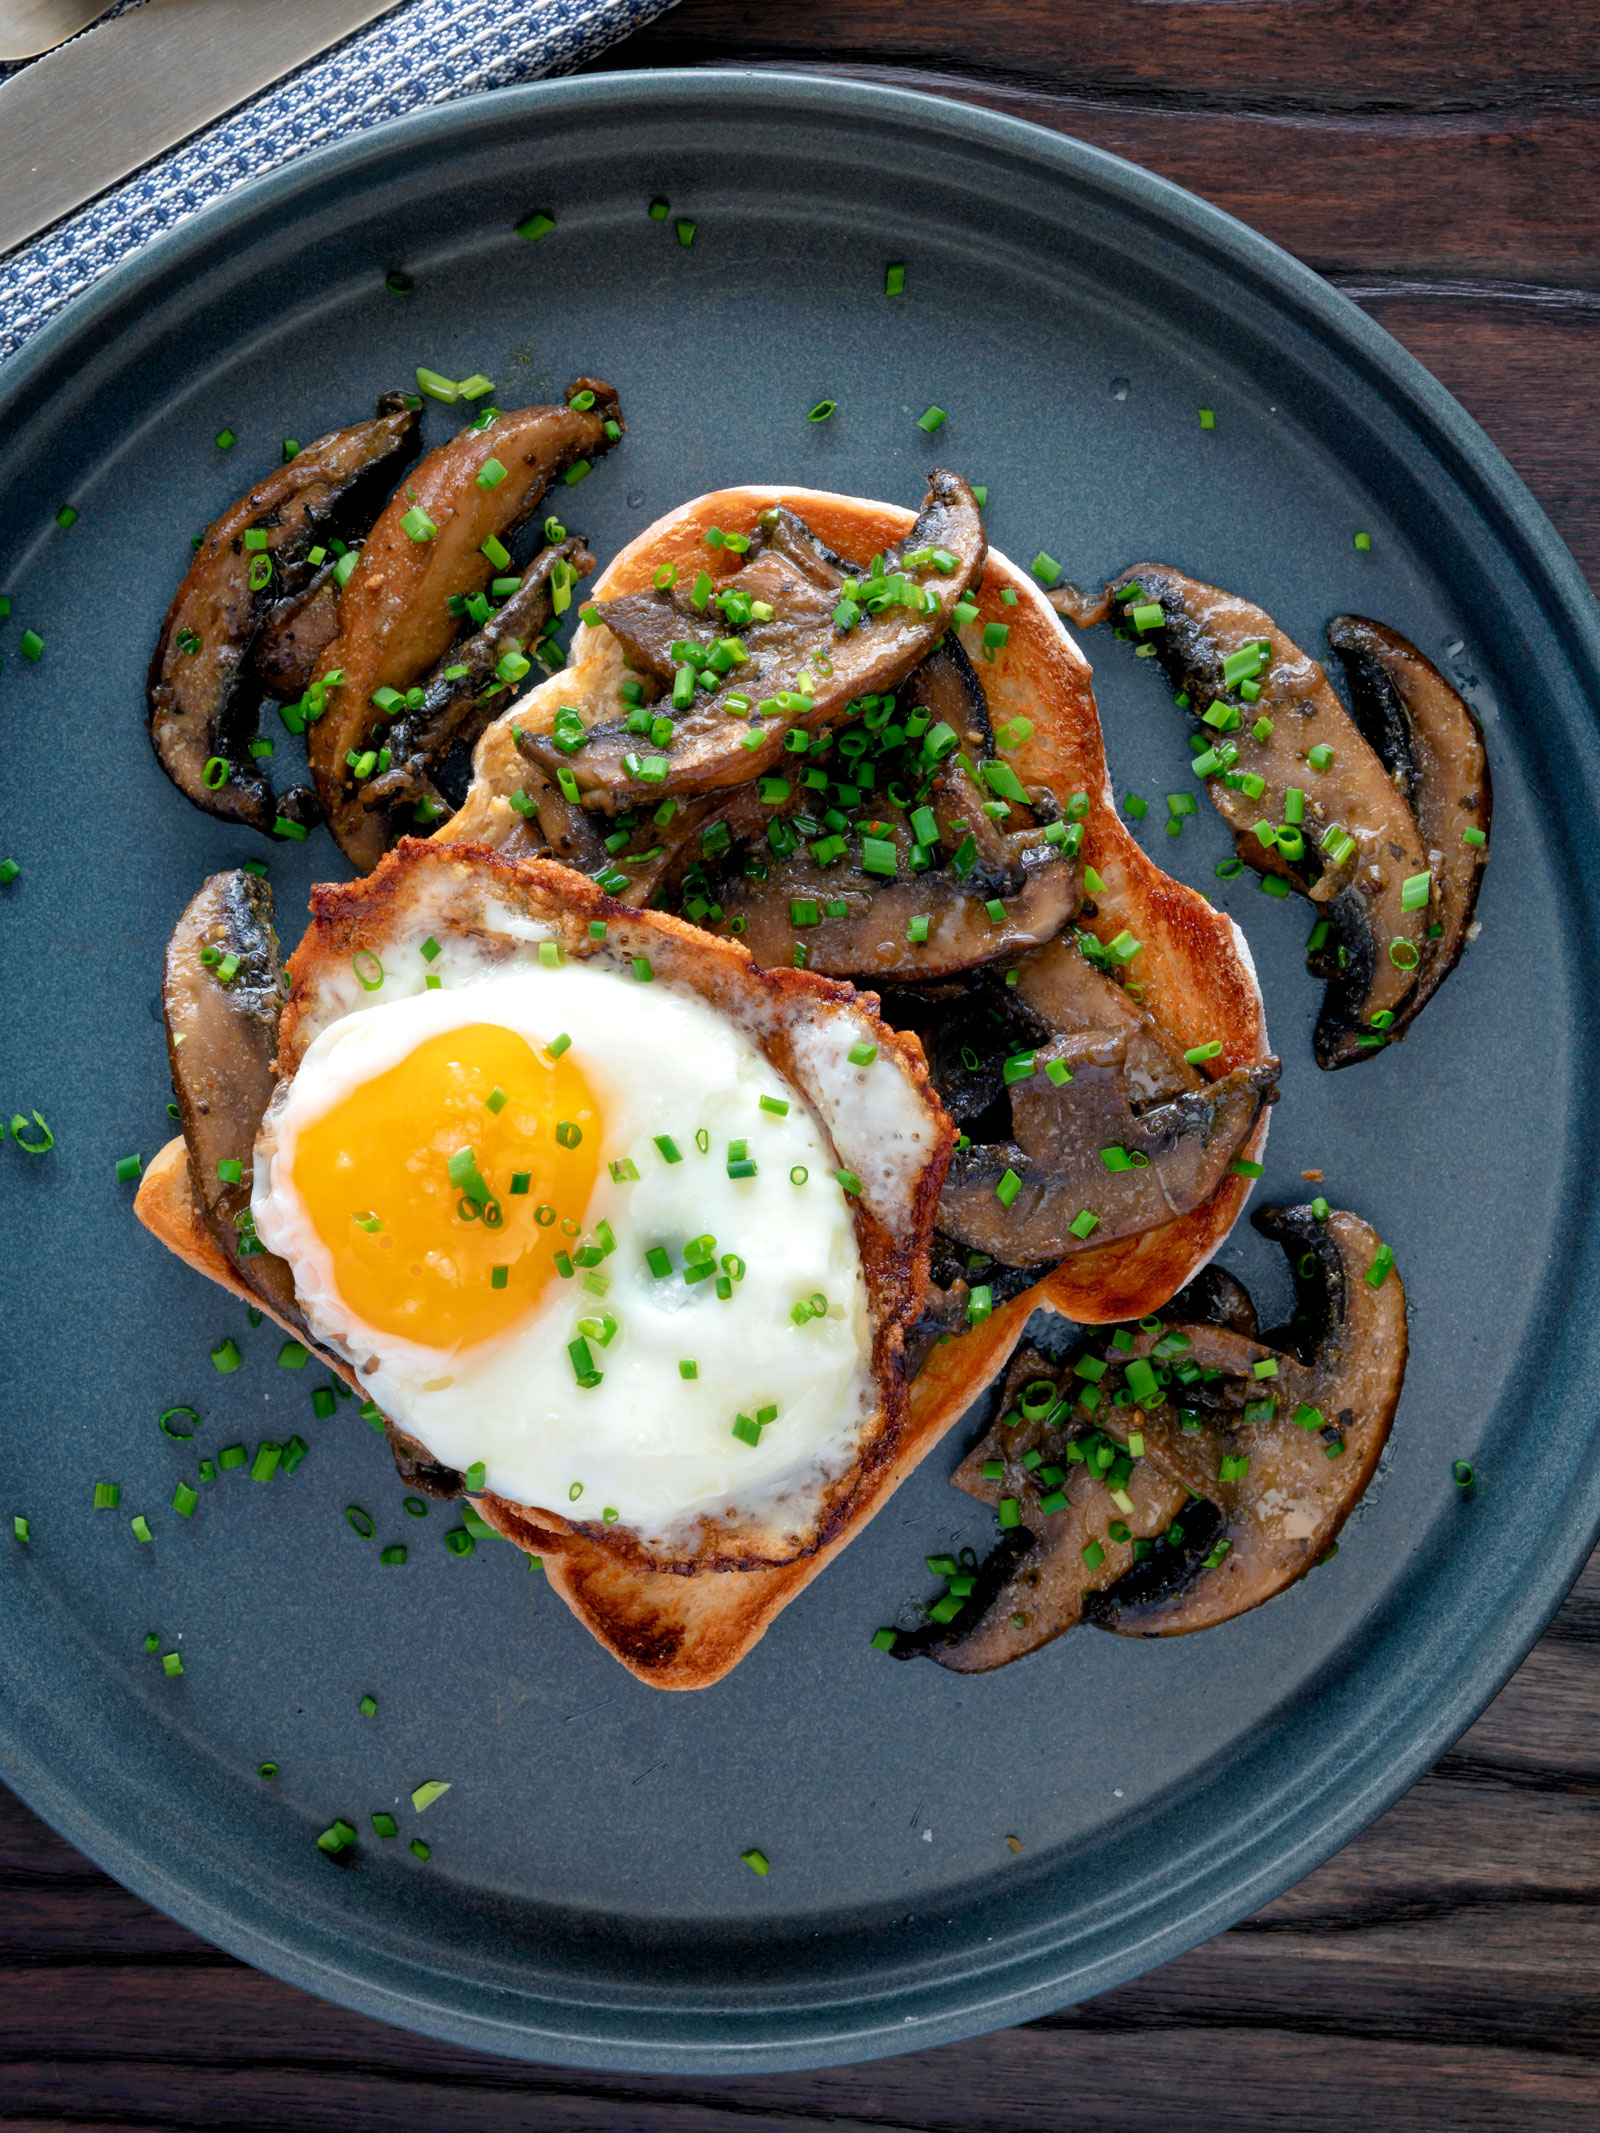 Overhead devilled mushrooms on toast with a fried egg.